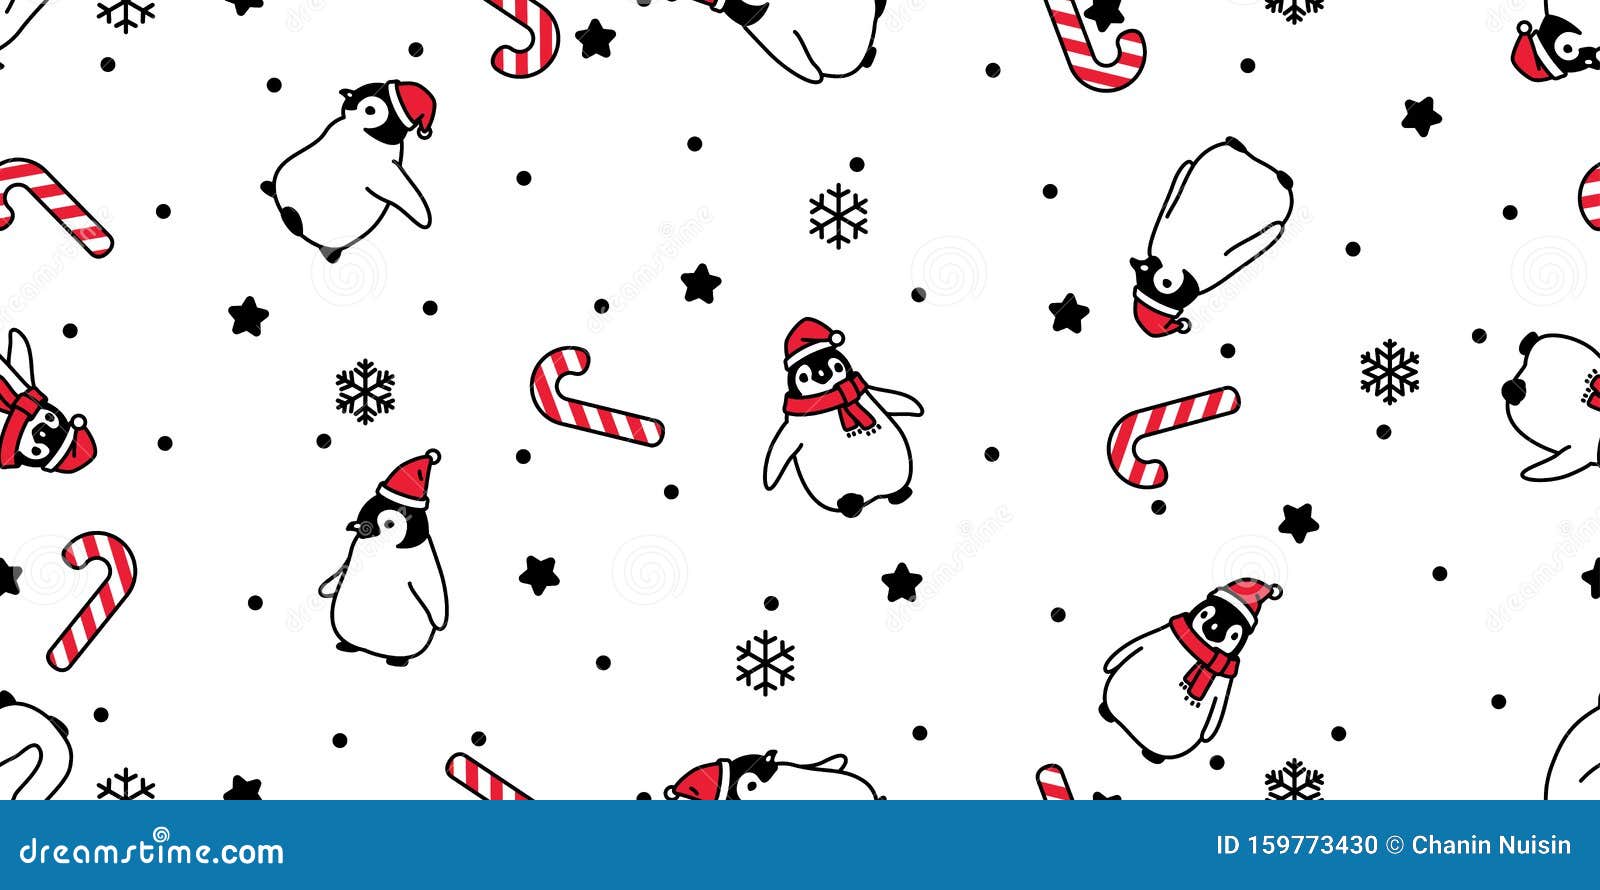 Penguin Seamless Pattern Christmas Vector Santa Claus Hat Candy Cane Scarf  Isolated Repeat Wallpaper Tile Background Cartoon Chara Stock Illustration  - Illustration of claus, logo: 159773430